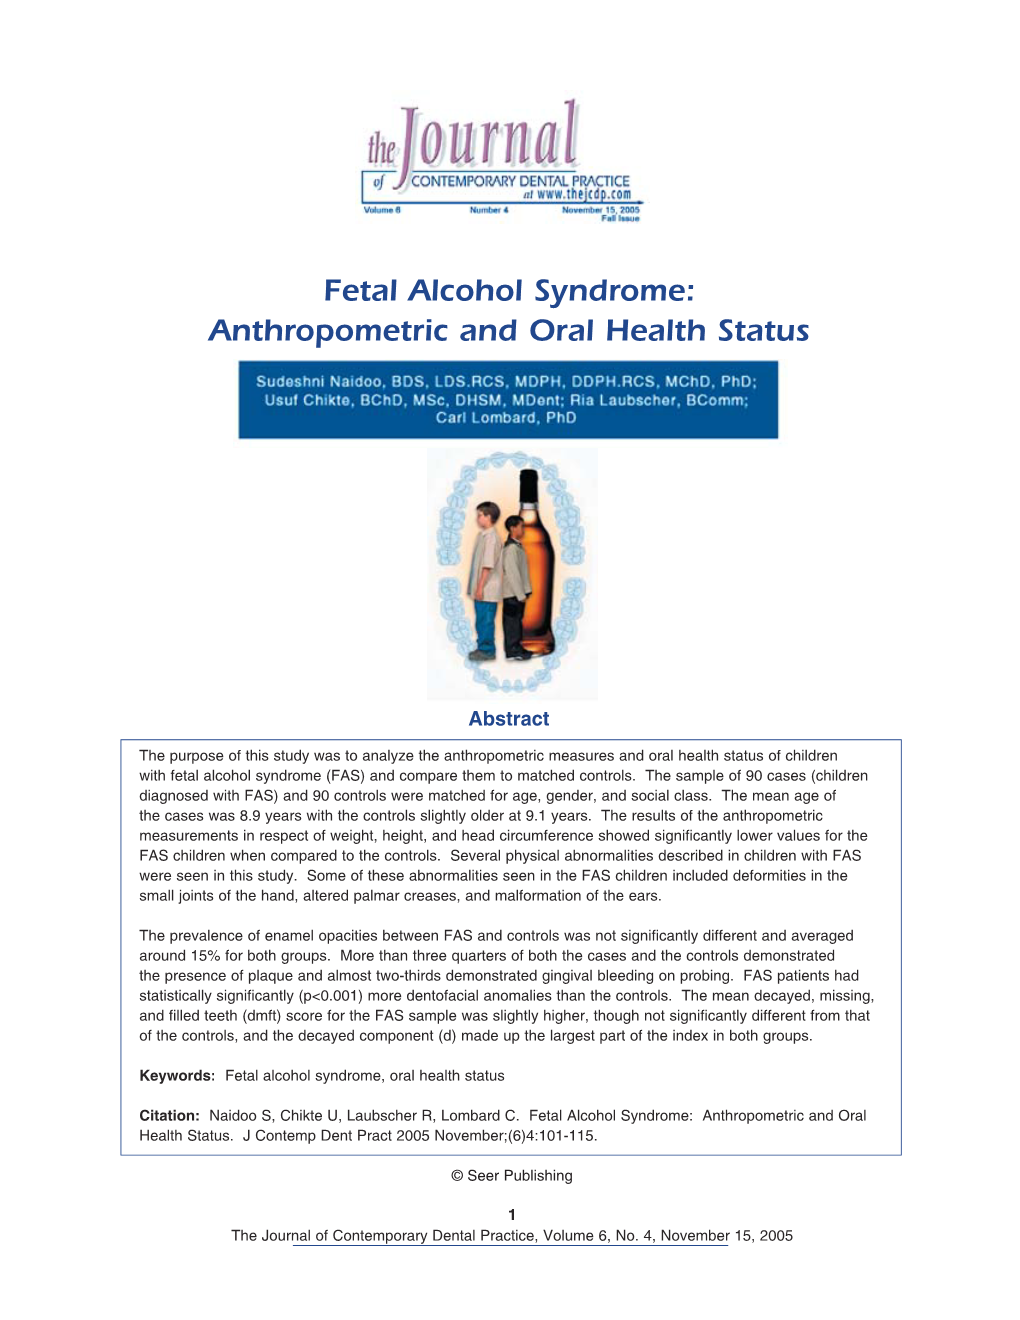 Fetal Alcohol Syndrome: Anthropometric and Oral Health Status